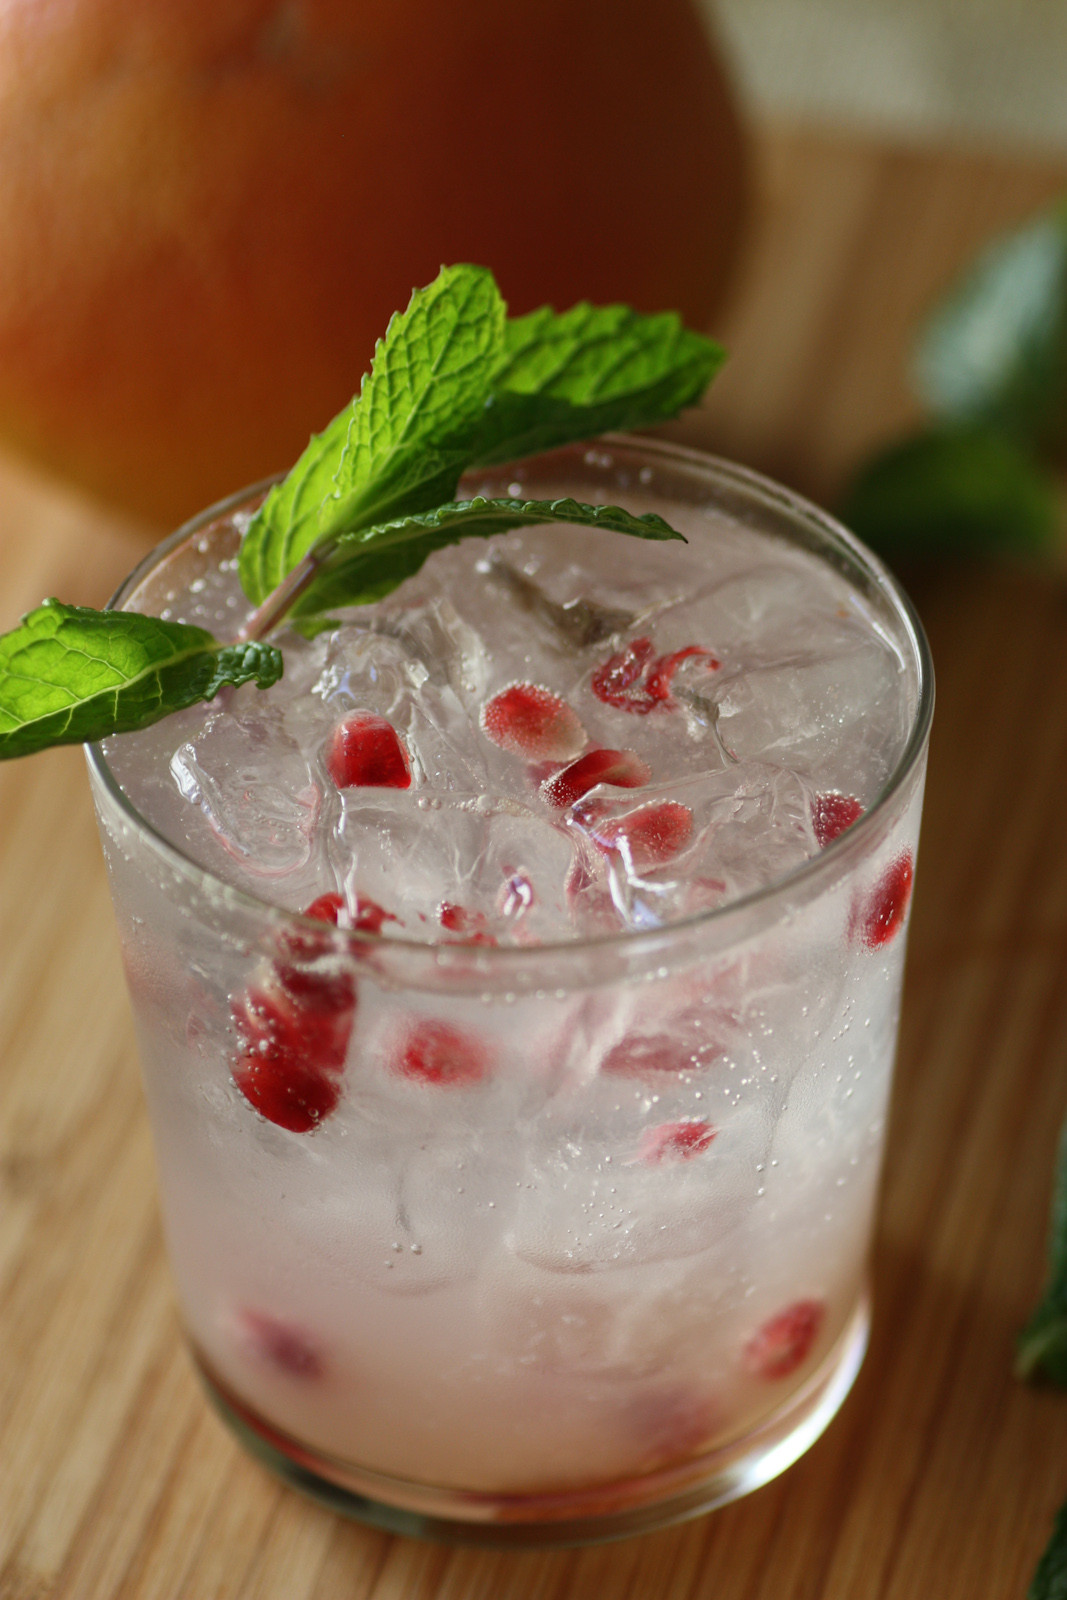 Holiday Cocktail Ideas Christmas Party
 Make This Delicious Winter Sea Breeze Holiday Cocktail